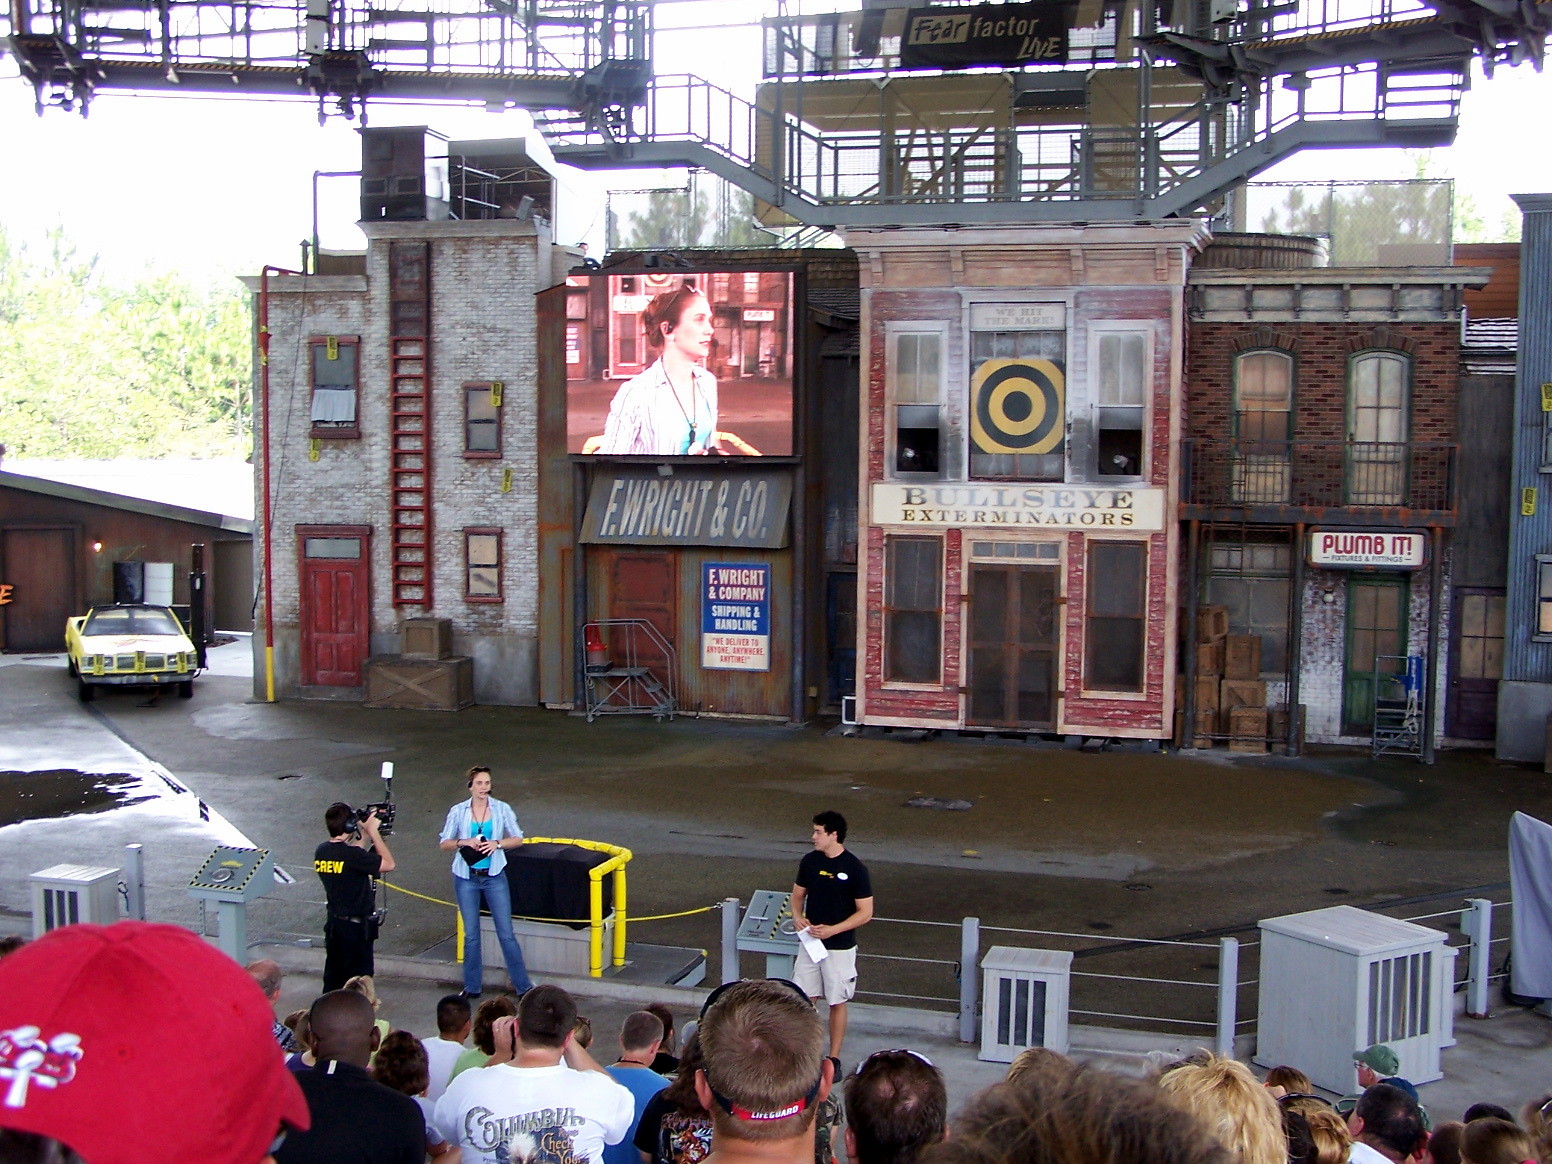 Fear Factor Live mid-show